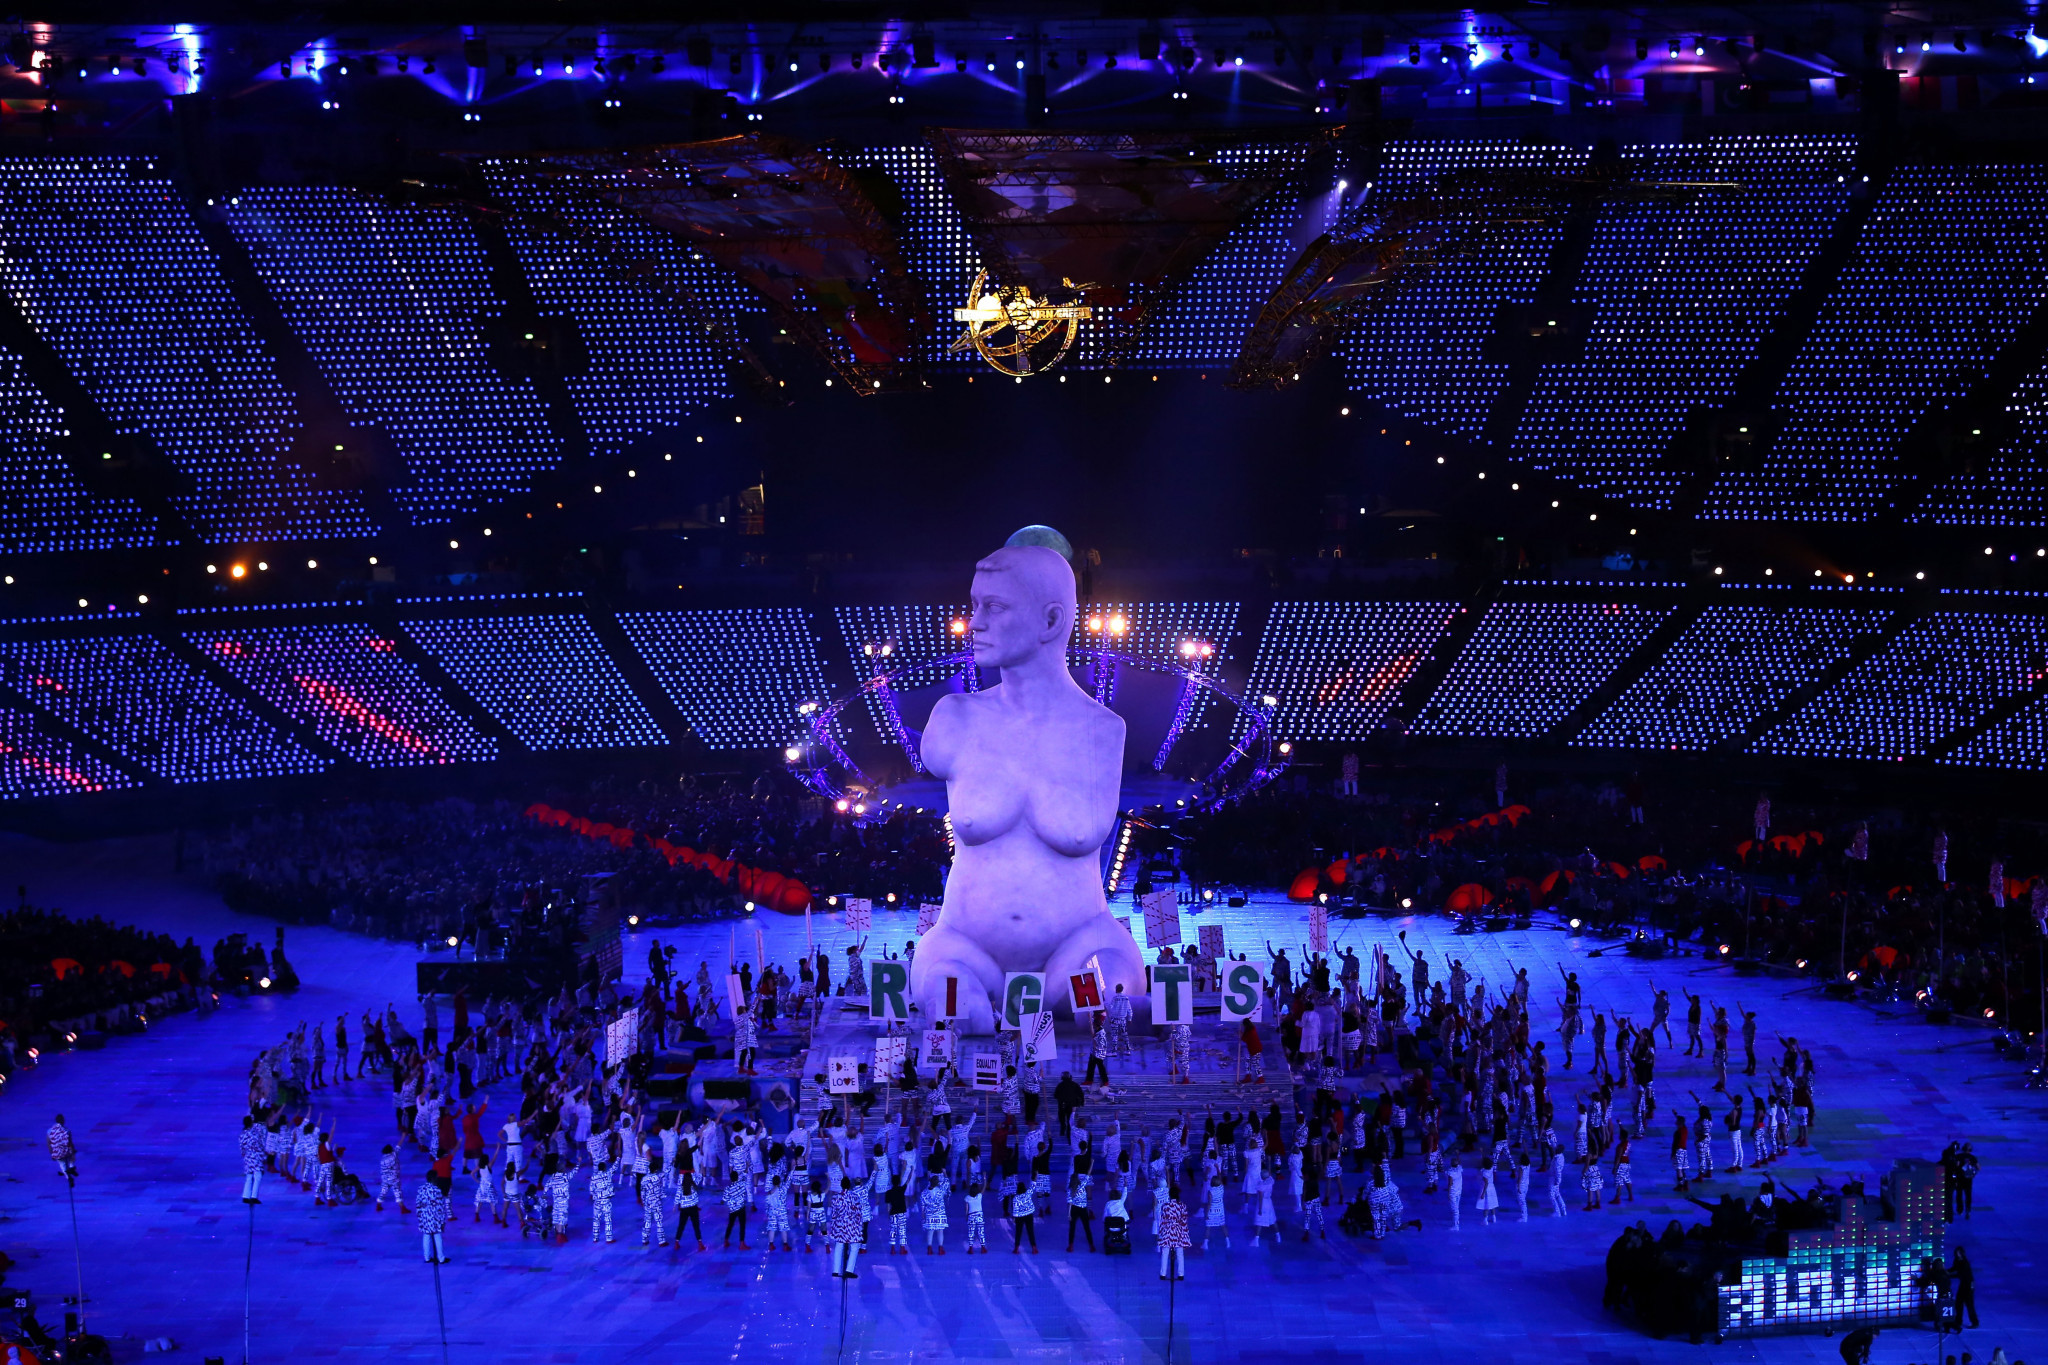 Artists perform during the opening ceremony of the London 2012 Paralympic Games at the Olympic Stadium in east London on August 29, 2012 ©Getty Images